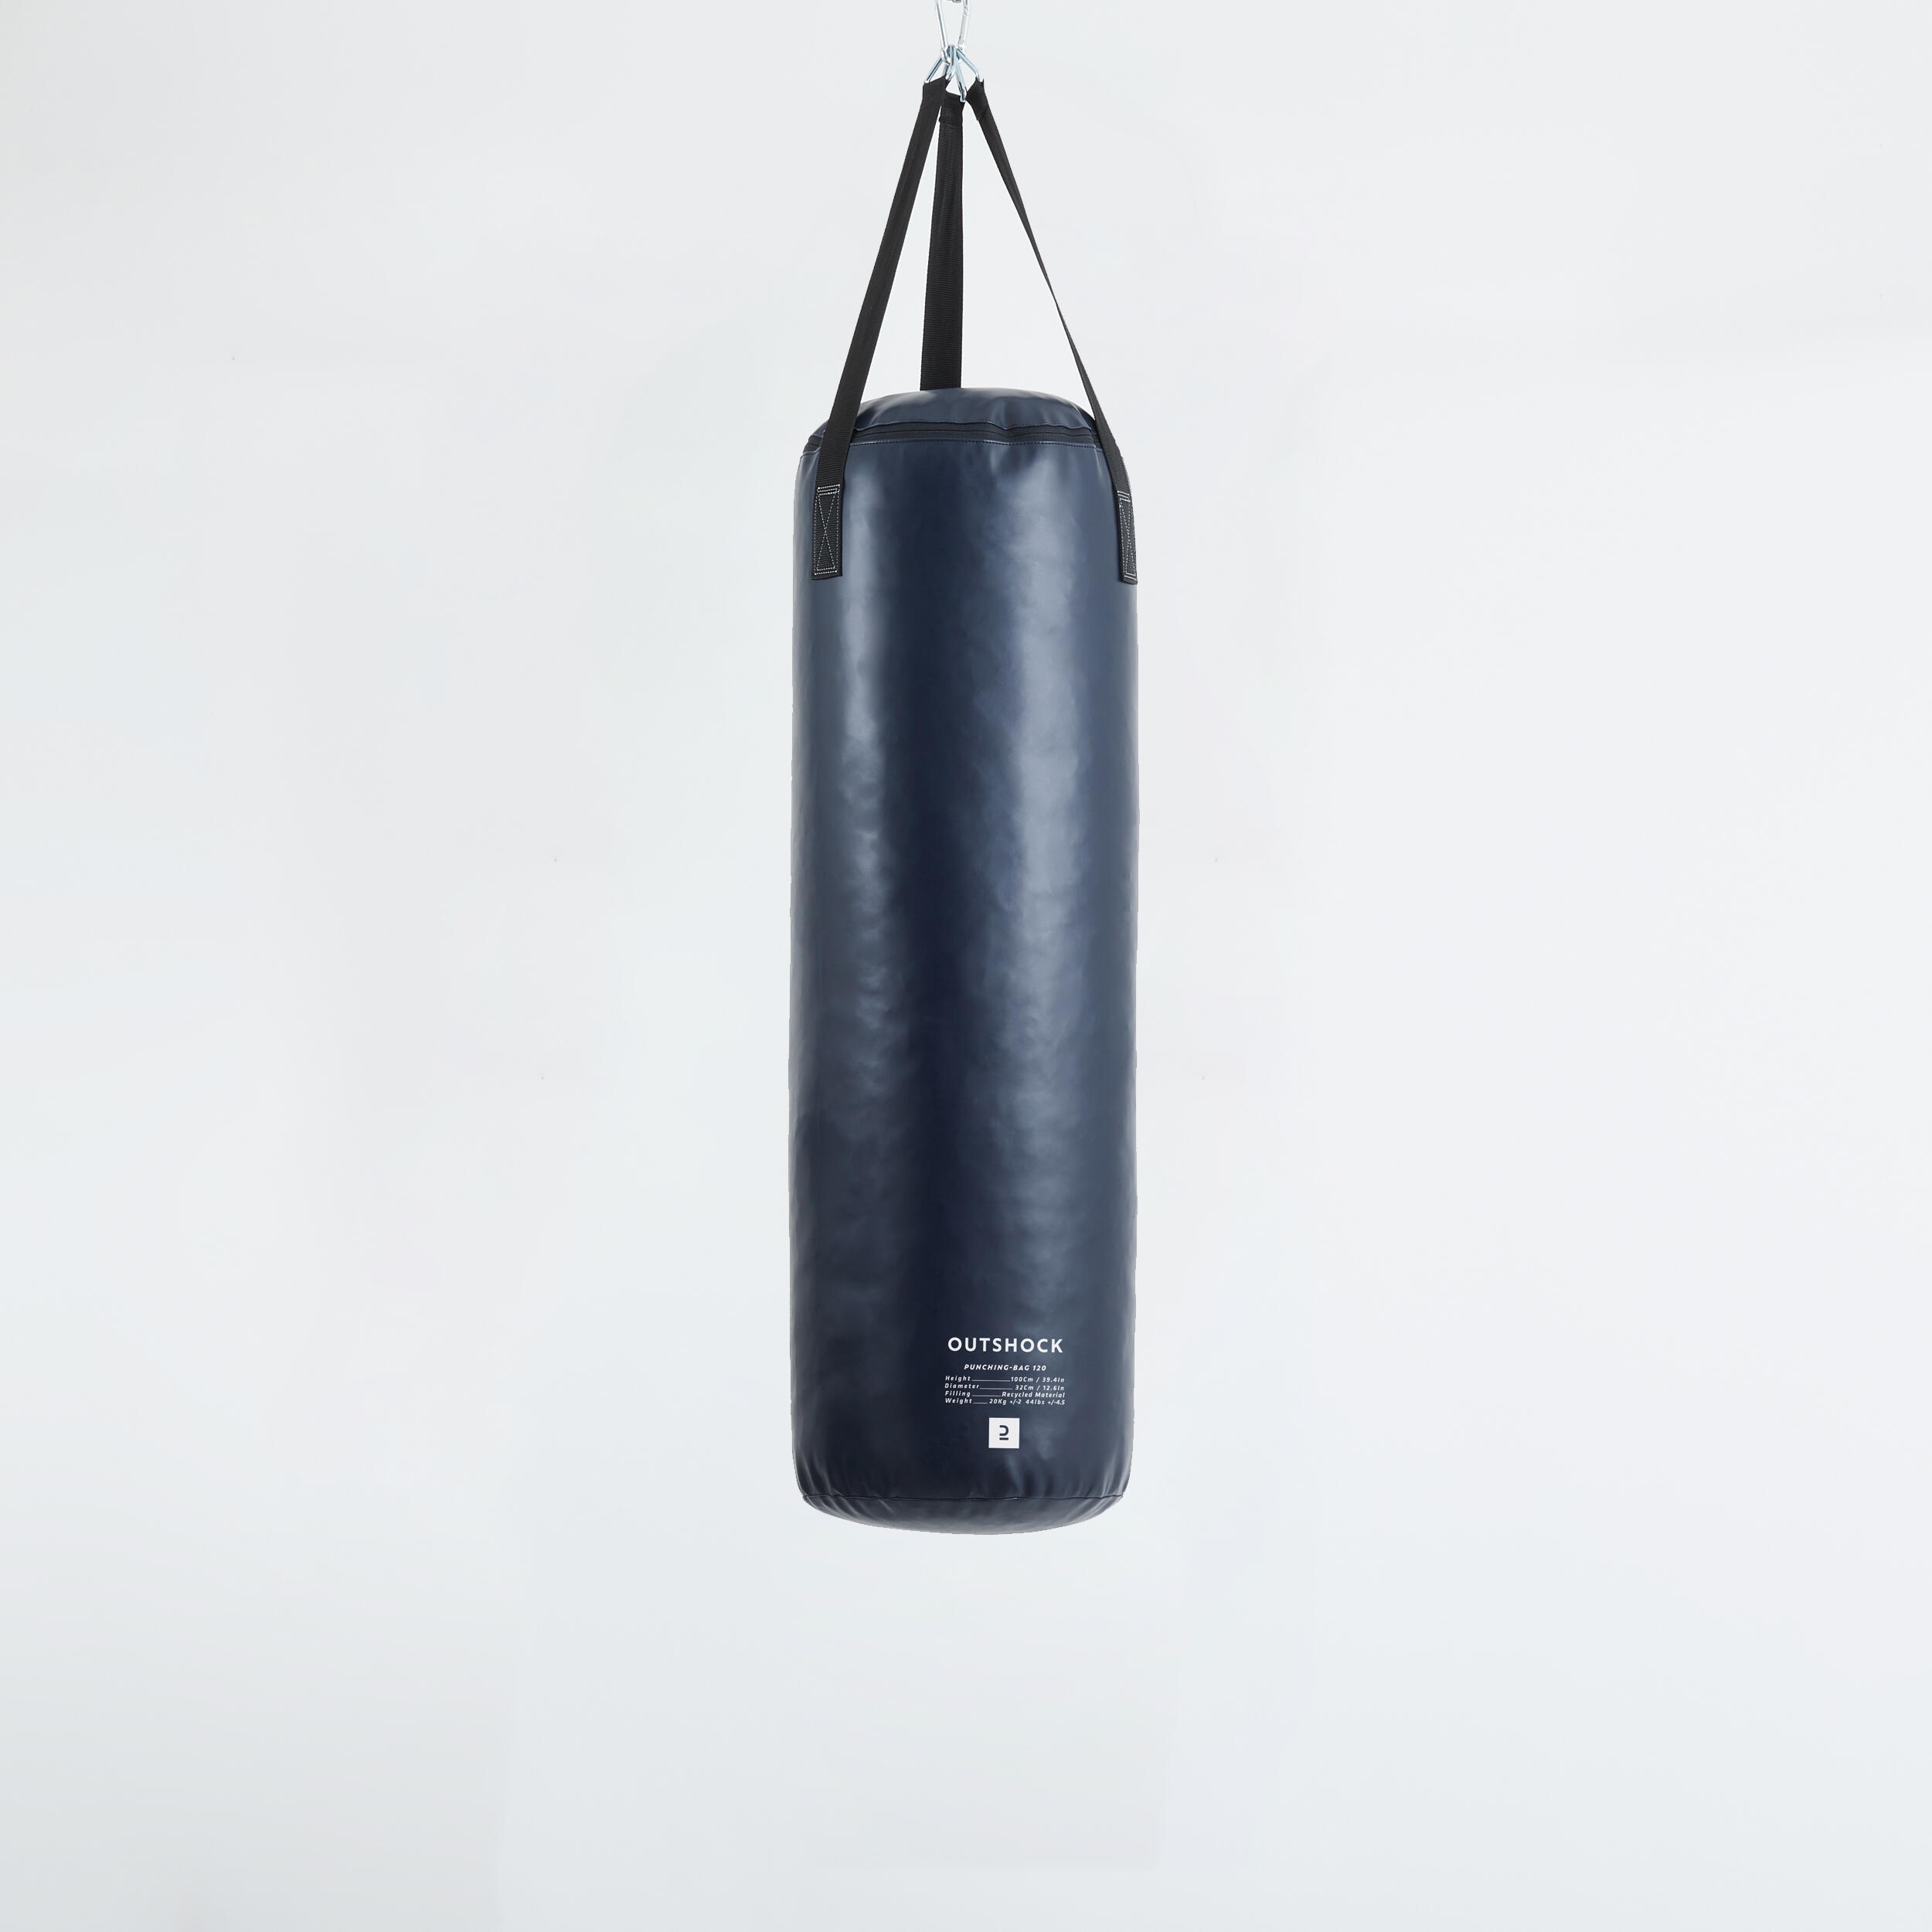 Heavy Bag Weight  Which Should You Choose  CombatDocket